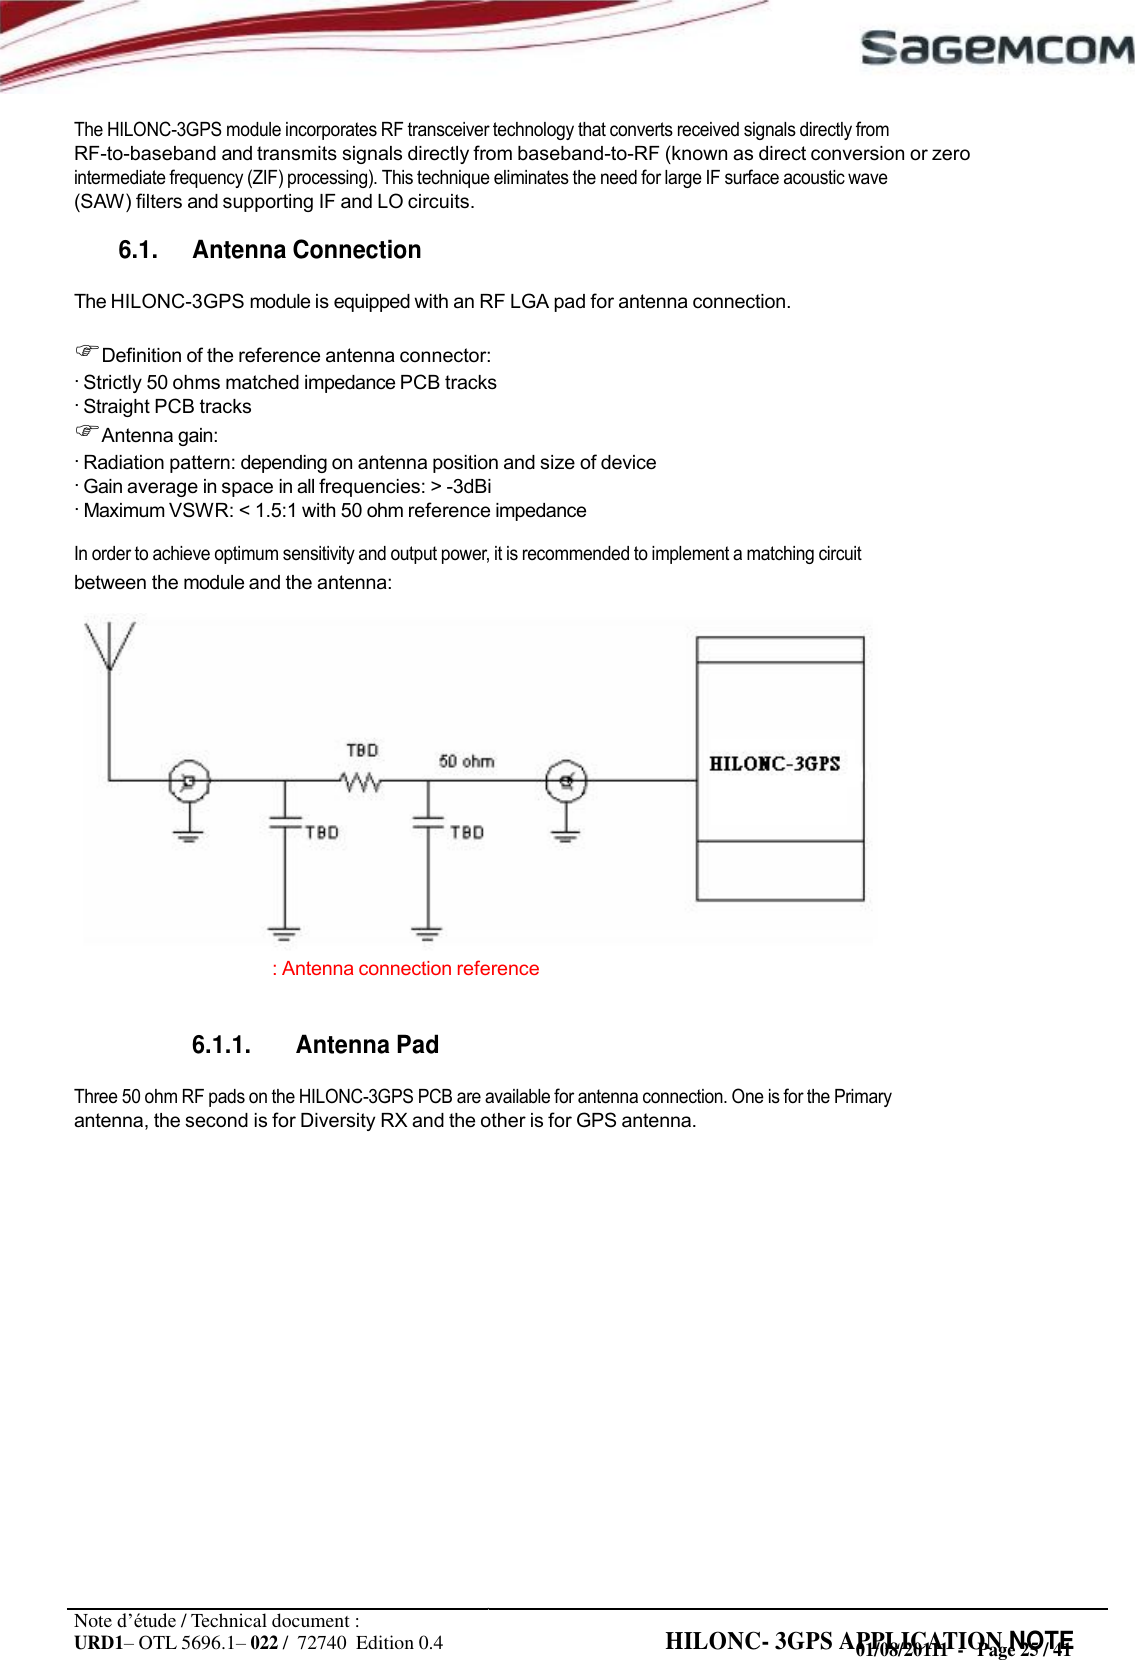 URD1– OTL 5696.1– 022 /  72740  Edition 0.4 HILONC- 3GPS APPLICATION NOTE      The HILONC-3GPS module incorporates RF transceiver technology that converts received signals directly from RF-to-baseband and transmits signals directly from baseband-to-RF (known as direct conversion or zero intermediate frequency (ZIF) processing). This technique eliminates the need for large IF surface acoustic wave (SAW) filters and supporting IF and LO circuits.  6.1. Antenna Connection  The HILONC-3GPS module is equipped with an RF LGA pad for antenna connection.  Definition of the reference antenna connector: · Strictly 50 ohms matched impedance PCB tracks · Straight PCB tracks Antenna gain: · Radiation pattern: depending on antenna position and size of device · Gain average in space in all frequencies: &gt; -3dBi · Maximum VSWR: &lt; 1.5:1 with 50 ohm reference impedance In order to achieve optimum sensitivity and output power, it is recommended to implement a matching circuit between the module and the antenna:               : Antenna connection reference   6.1.1. Antenna Pad  Three 50 ohm RF pads on the HILONC-3GPS PCB are available for antenna connection. One is for the Primary antenna, the second is for Diversity RX and the other is for GPS antenna.                    Note d’étude / Technical document : 01/08/20111  -   Page 25 / 41